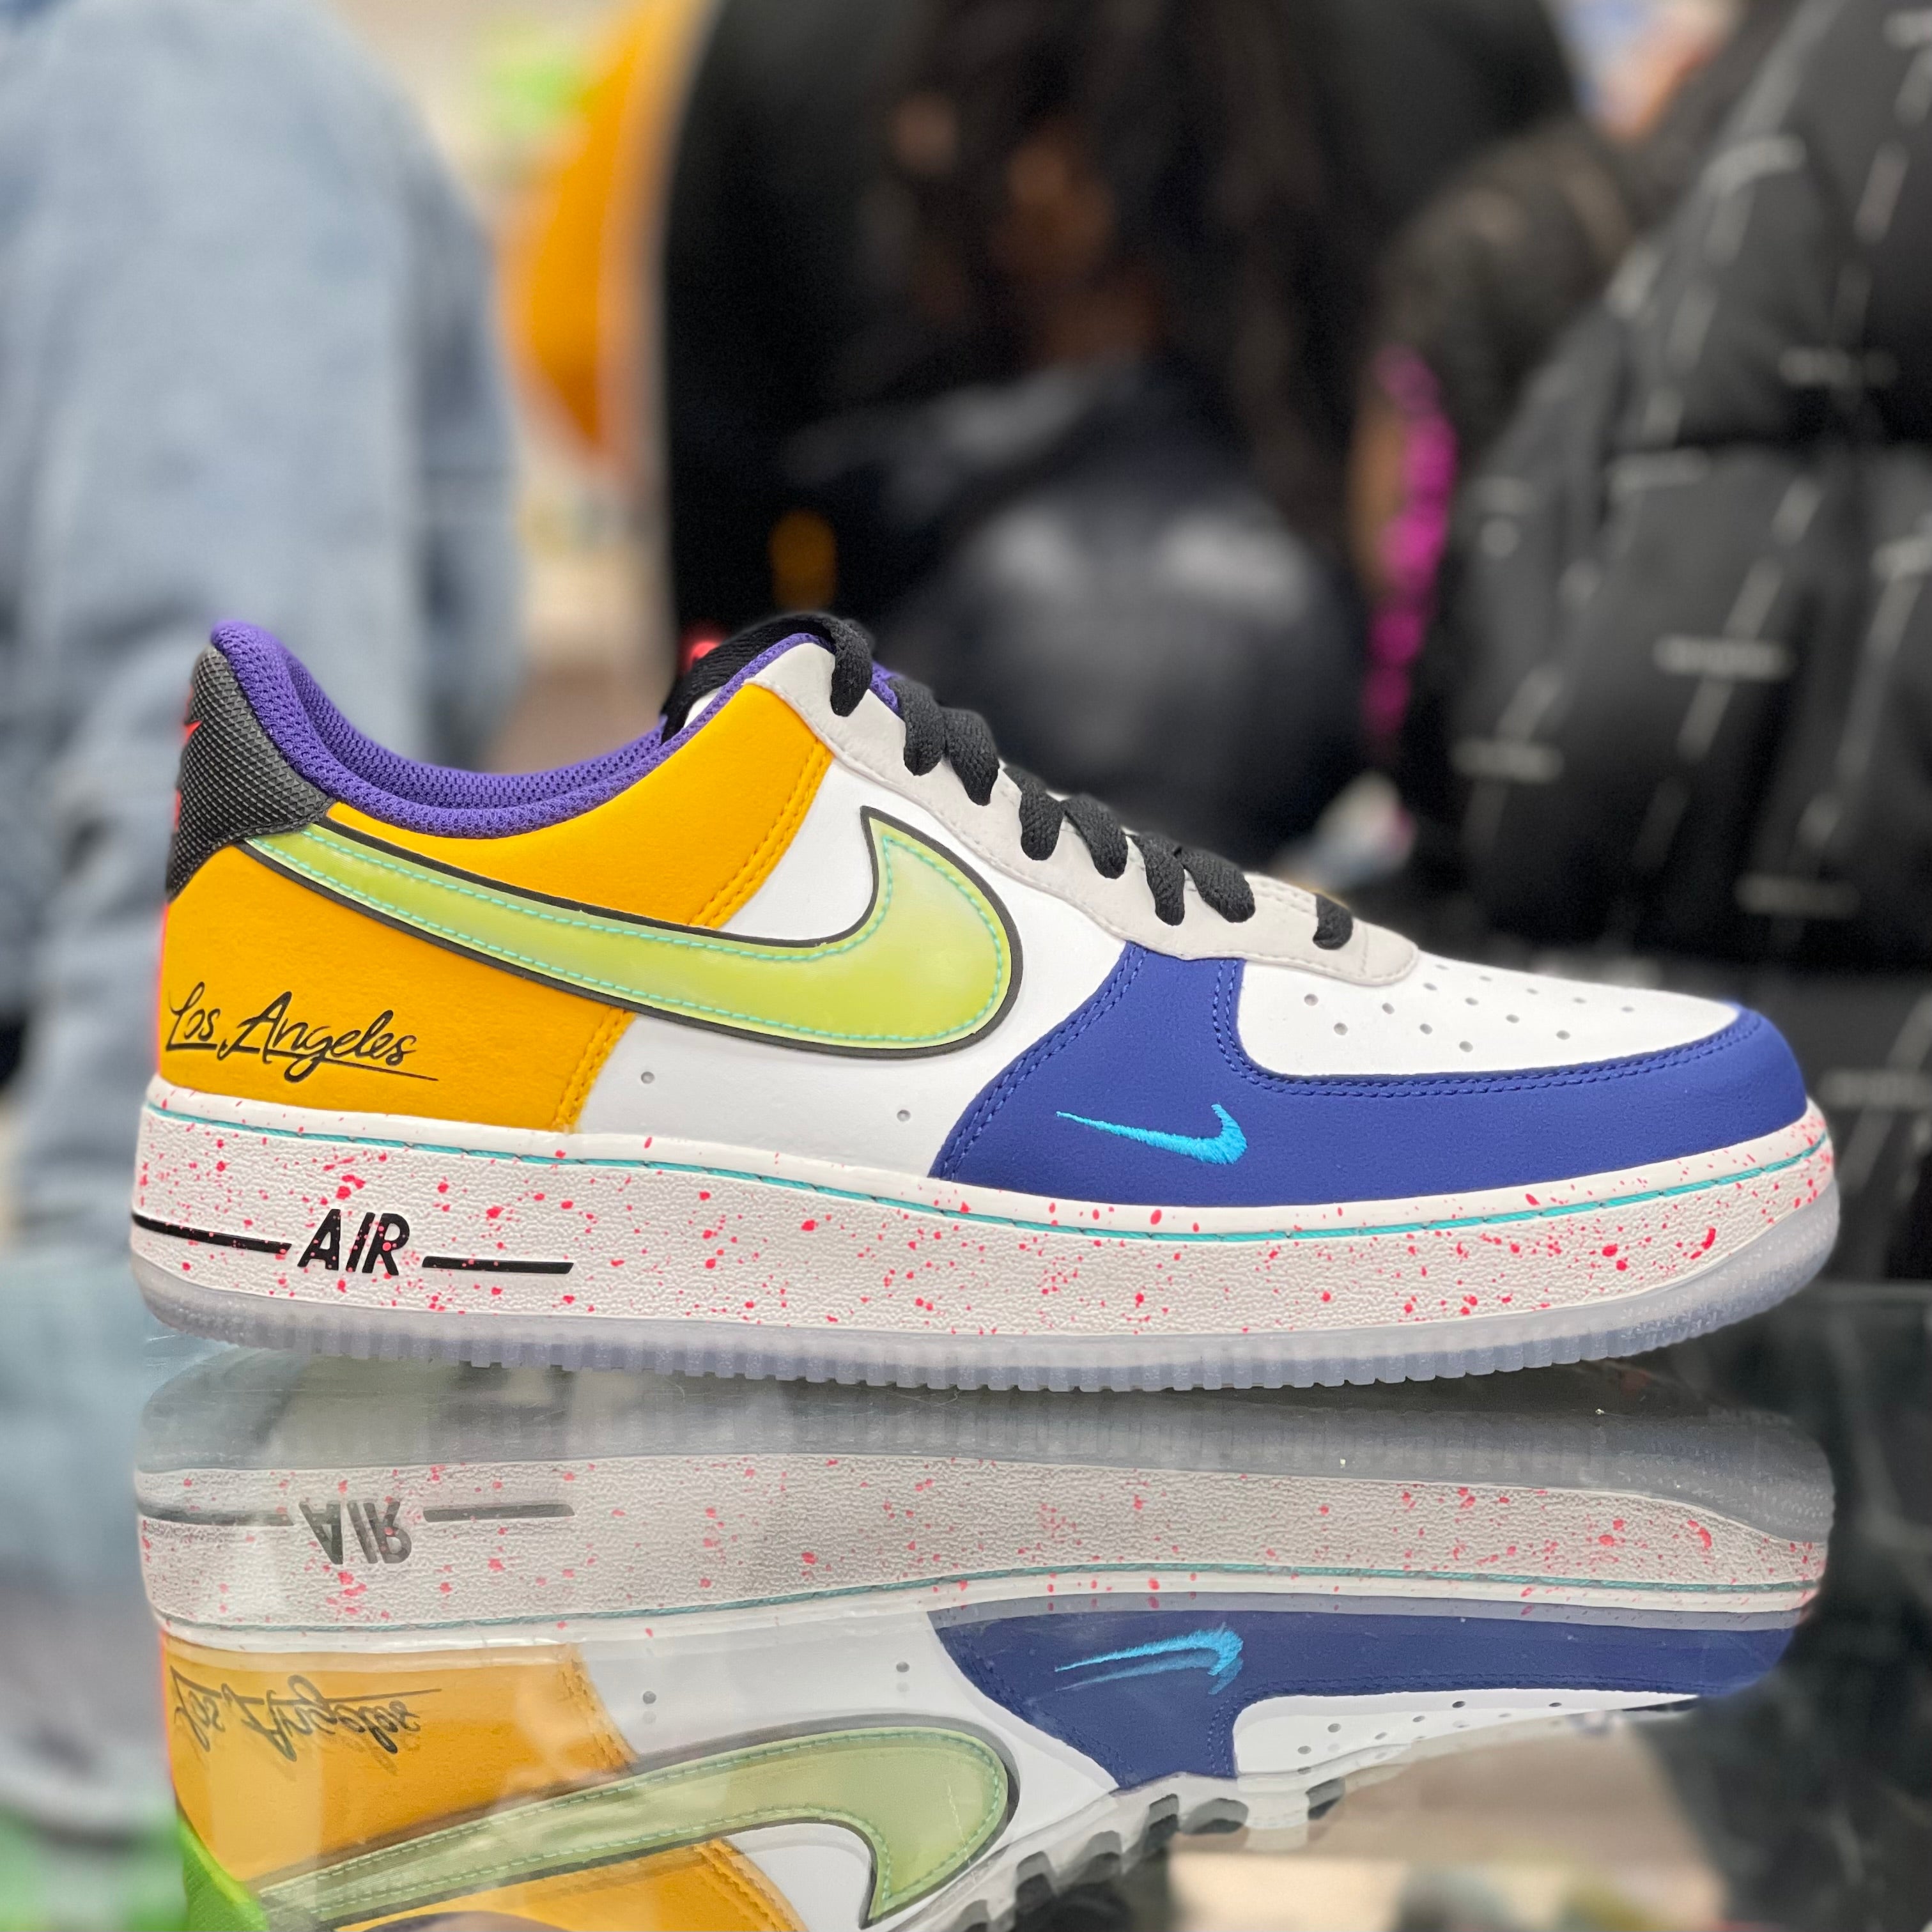 Nike Air Force 1 Low “What The LA”